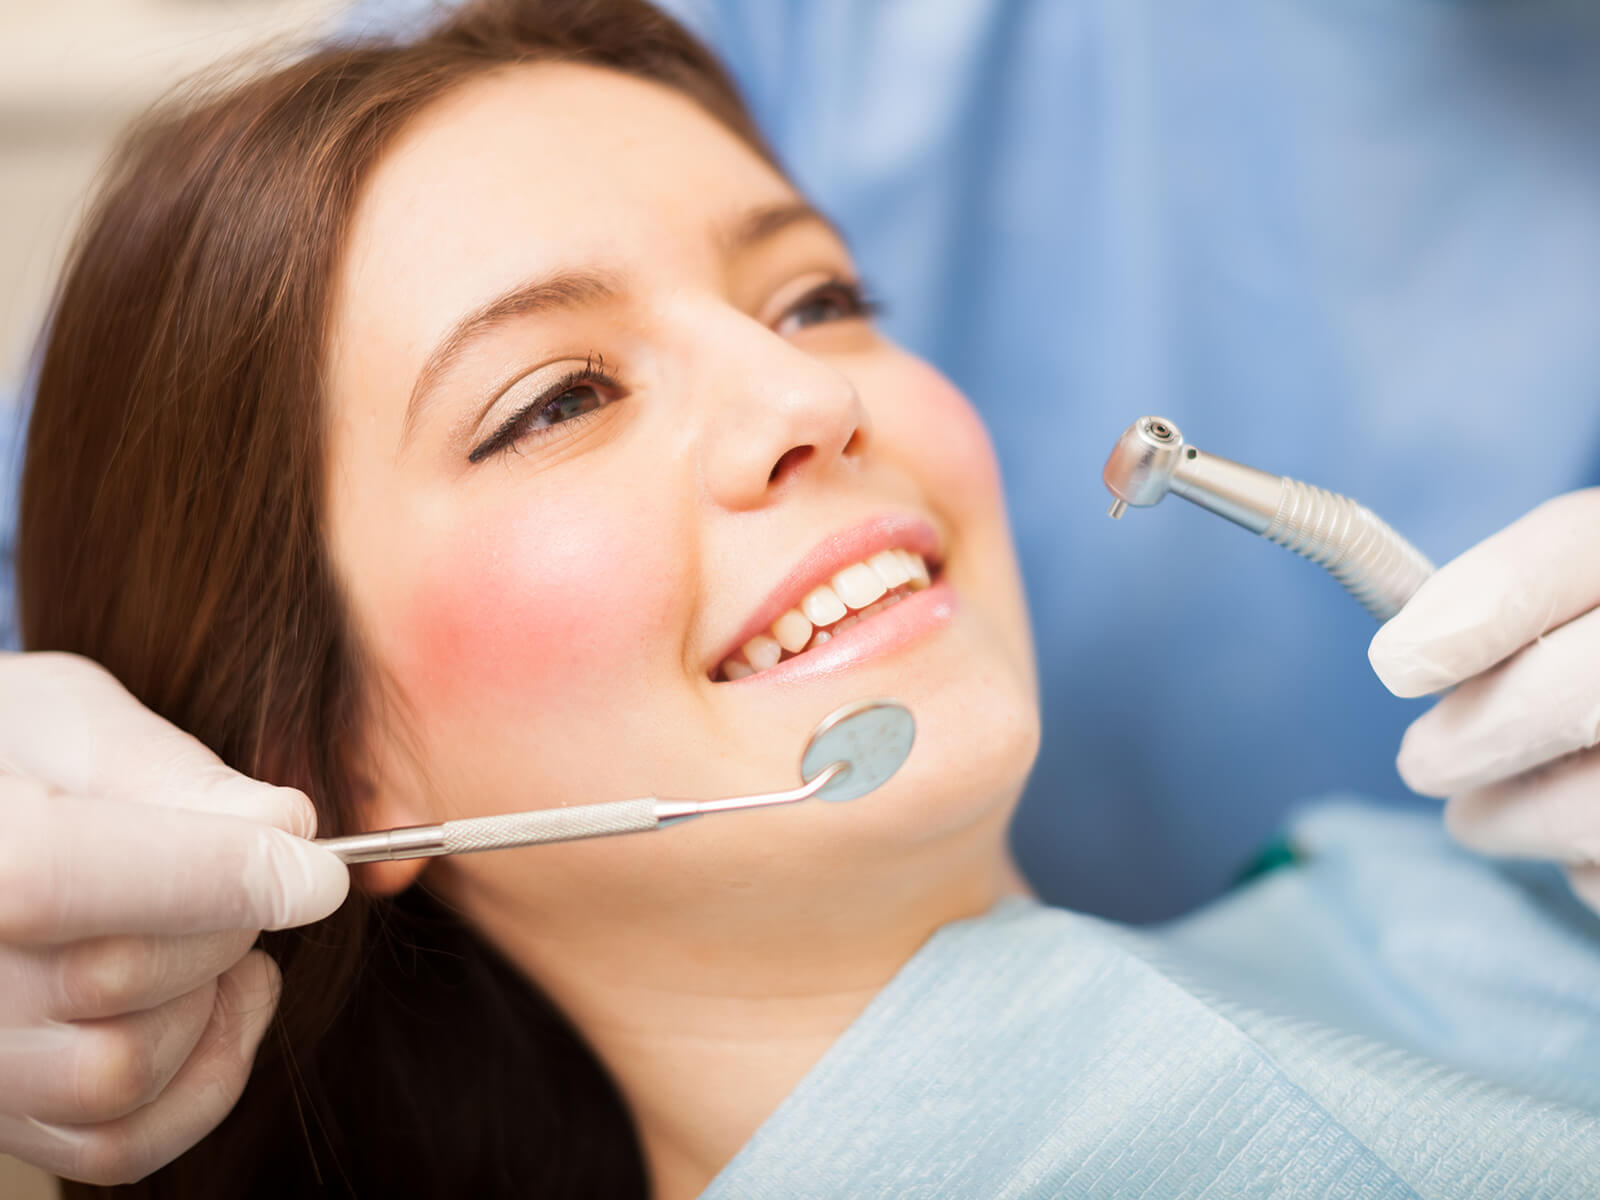 Are There Health Benefits To Straight Teeth?